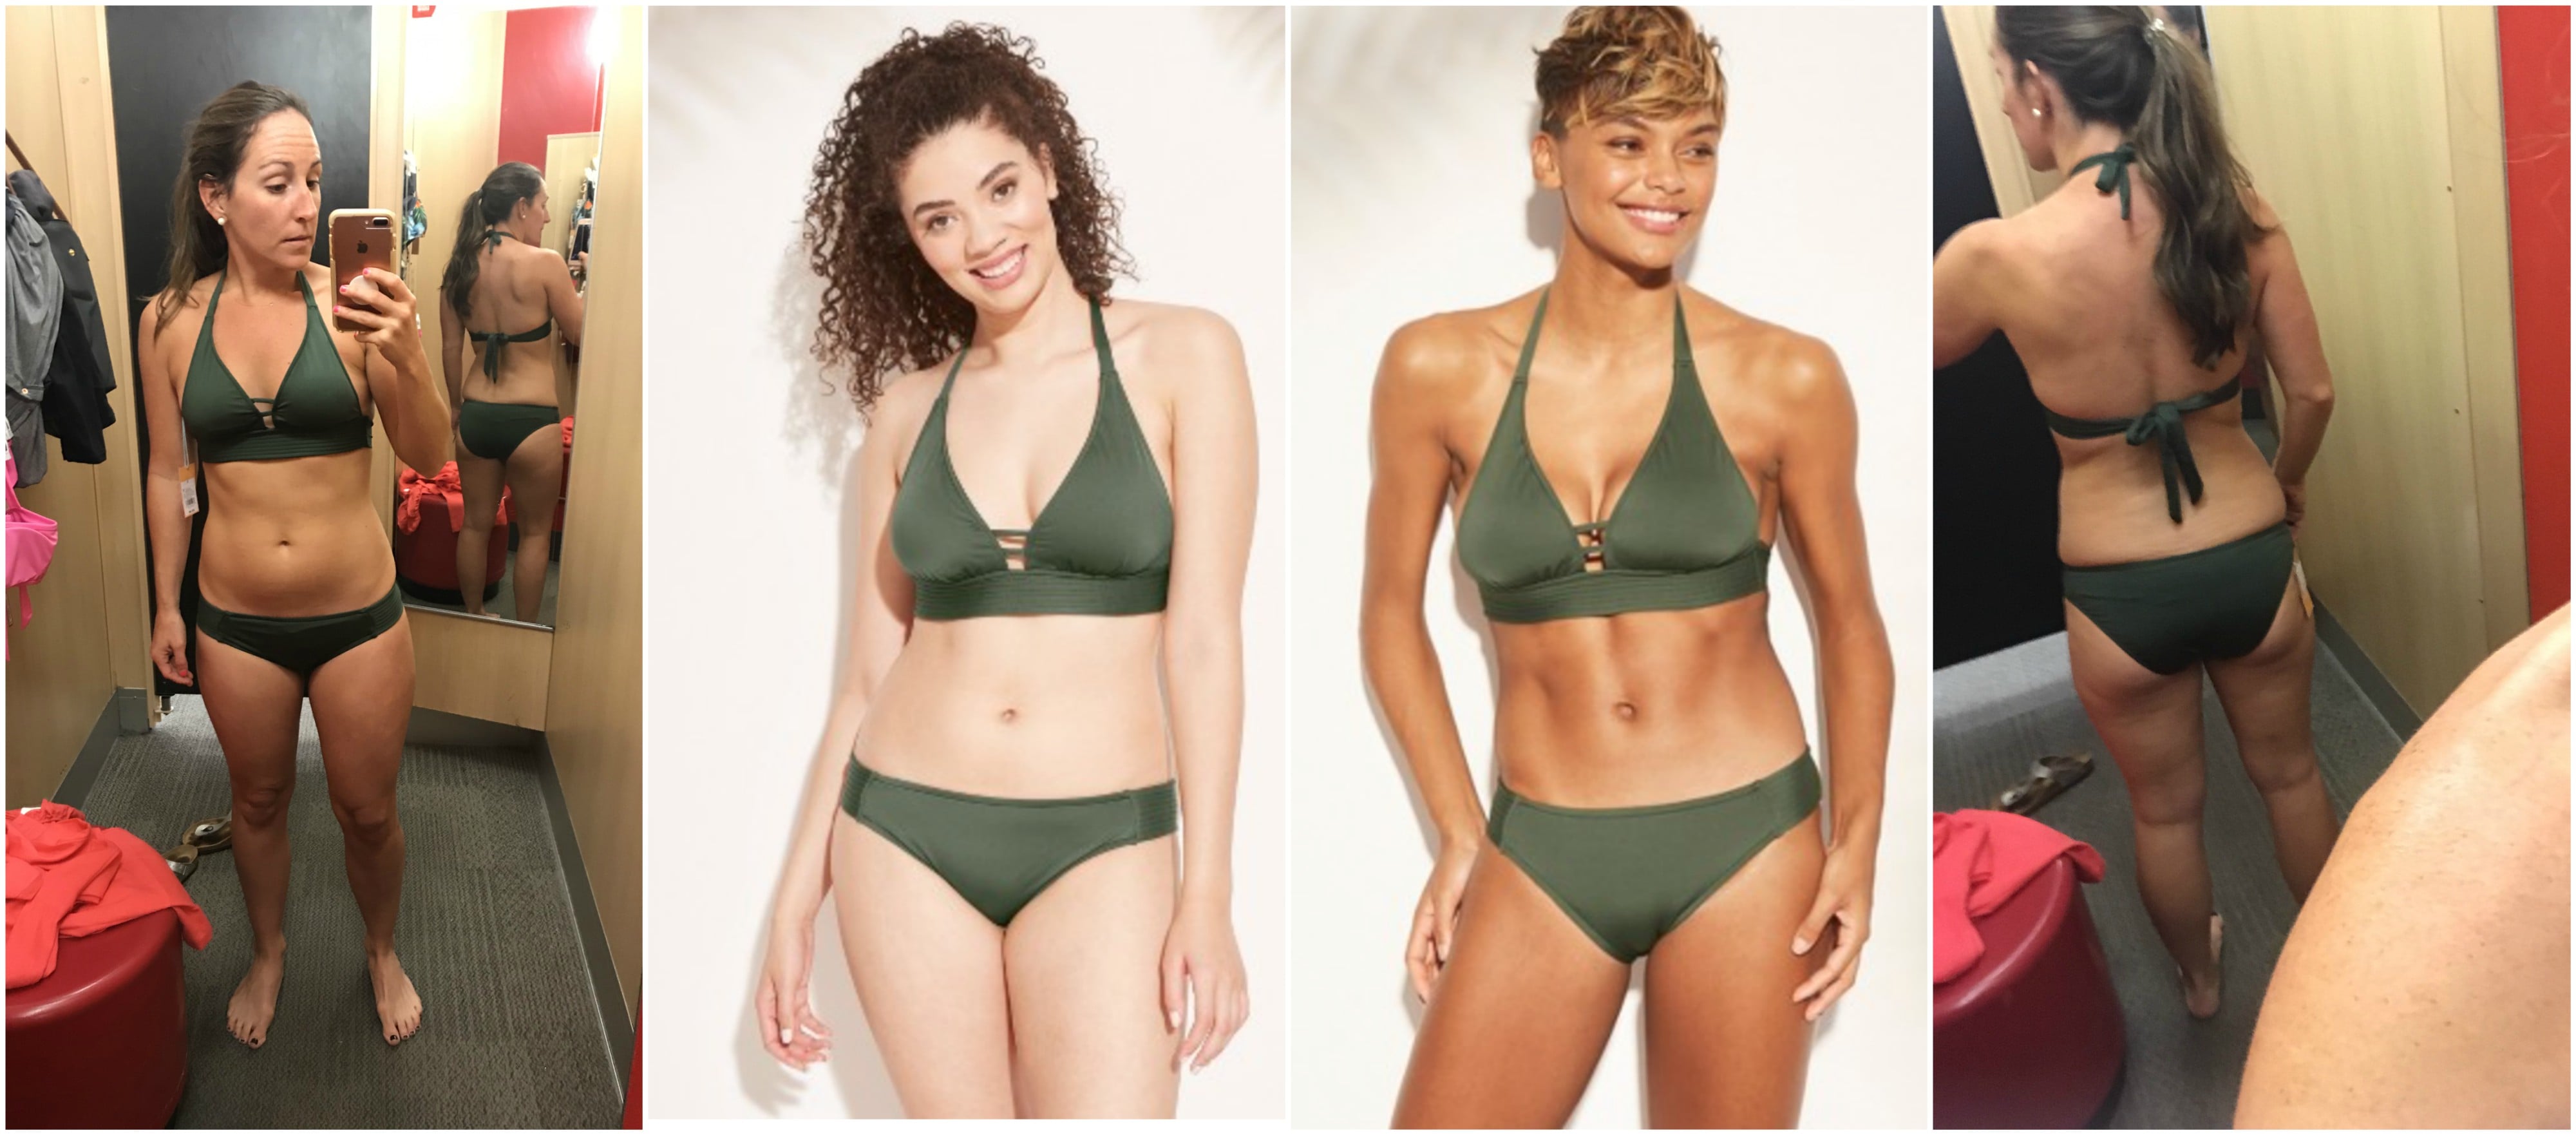 THE OFFICIAL GUIDE TO TARGET SWIMWEAR 2019 - Target Swimsuits - Target Swimsuit Fit Guide - Target Swimwear Fit - One Piece Swimsuit Target - Target Womens Swimsuits - Target Juniors Swimsuit - High Waisted Swimsuits Target - Target Womens Bikinis - Bikini Fit Target - Target Girls Swimsuits - #swimsuit #target